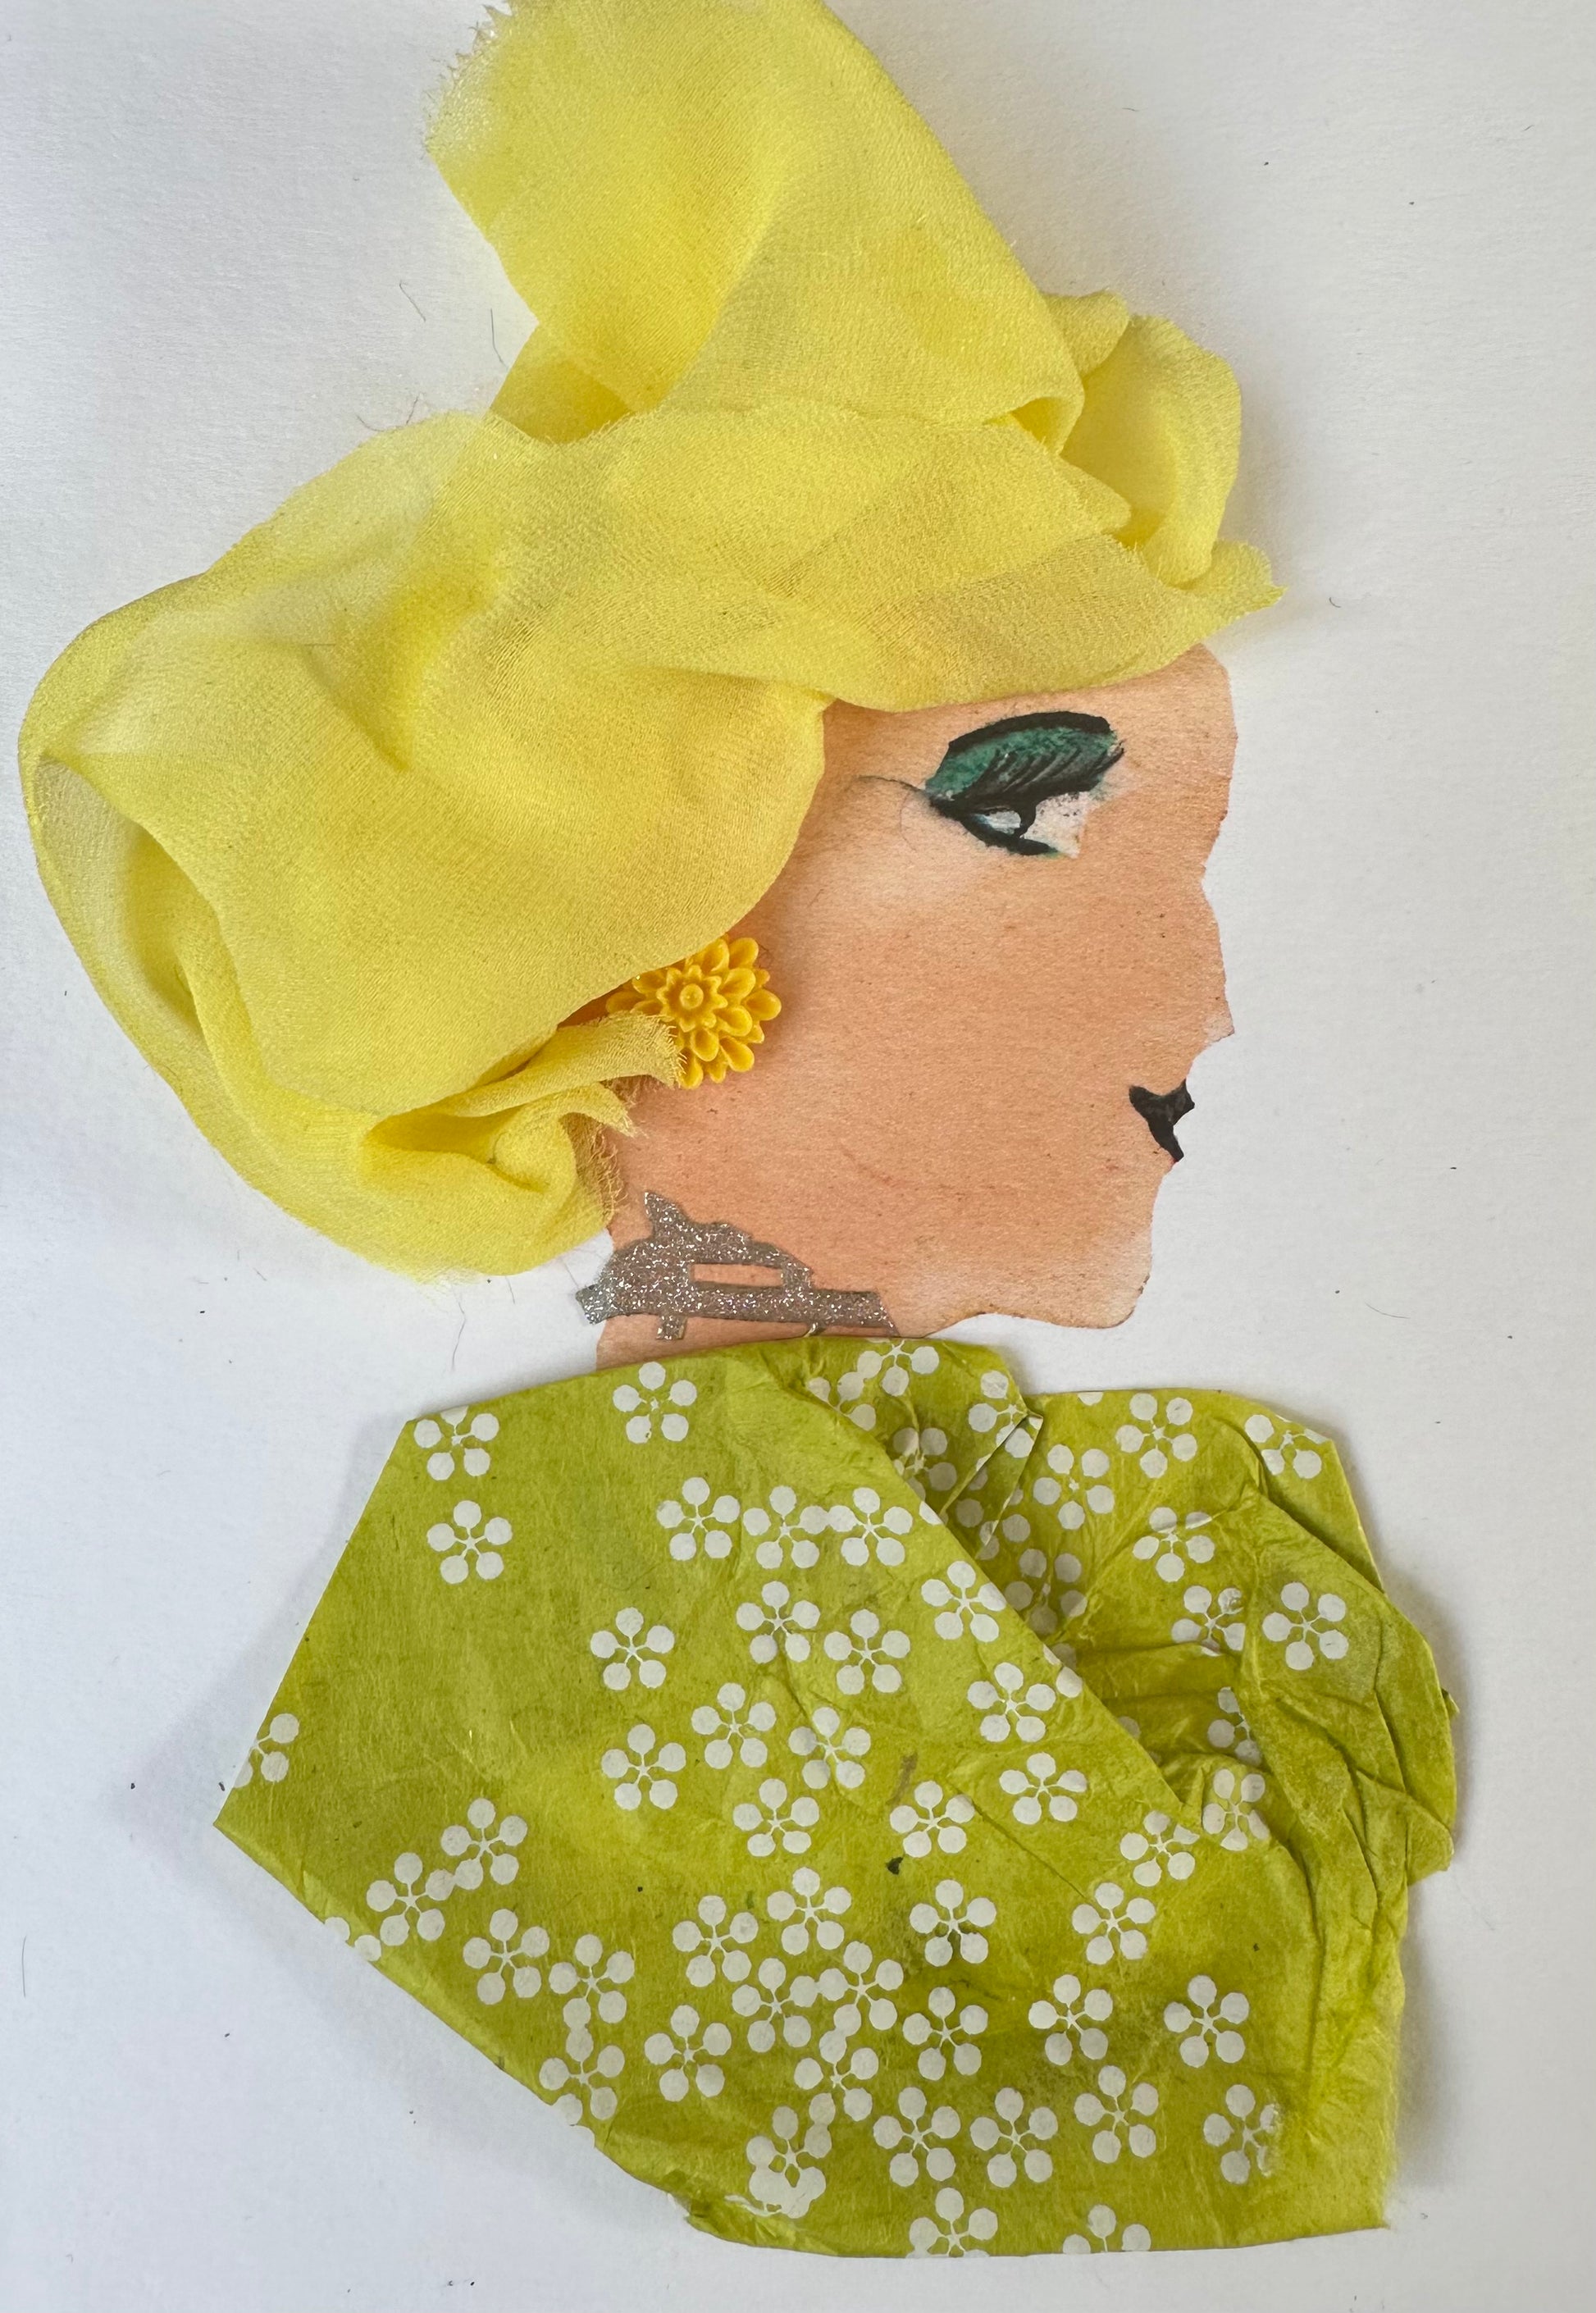 I designed this handmade card of a woman dressed in a yellow blouse with green undertones; it is patterned with small white flowers. She is wearing a bright yellow hatinator and yellow flower shaped earrings. Finally, she is wearing a dark green eye shadow.